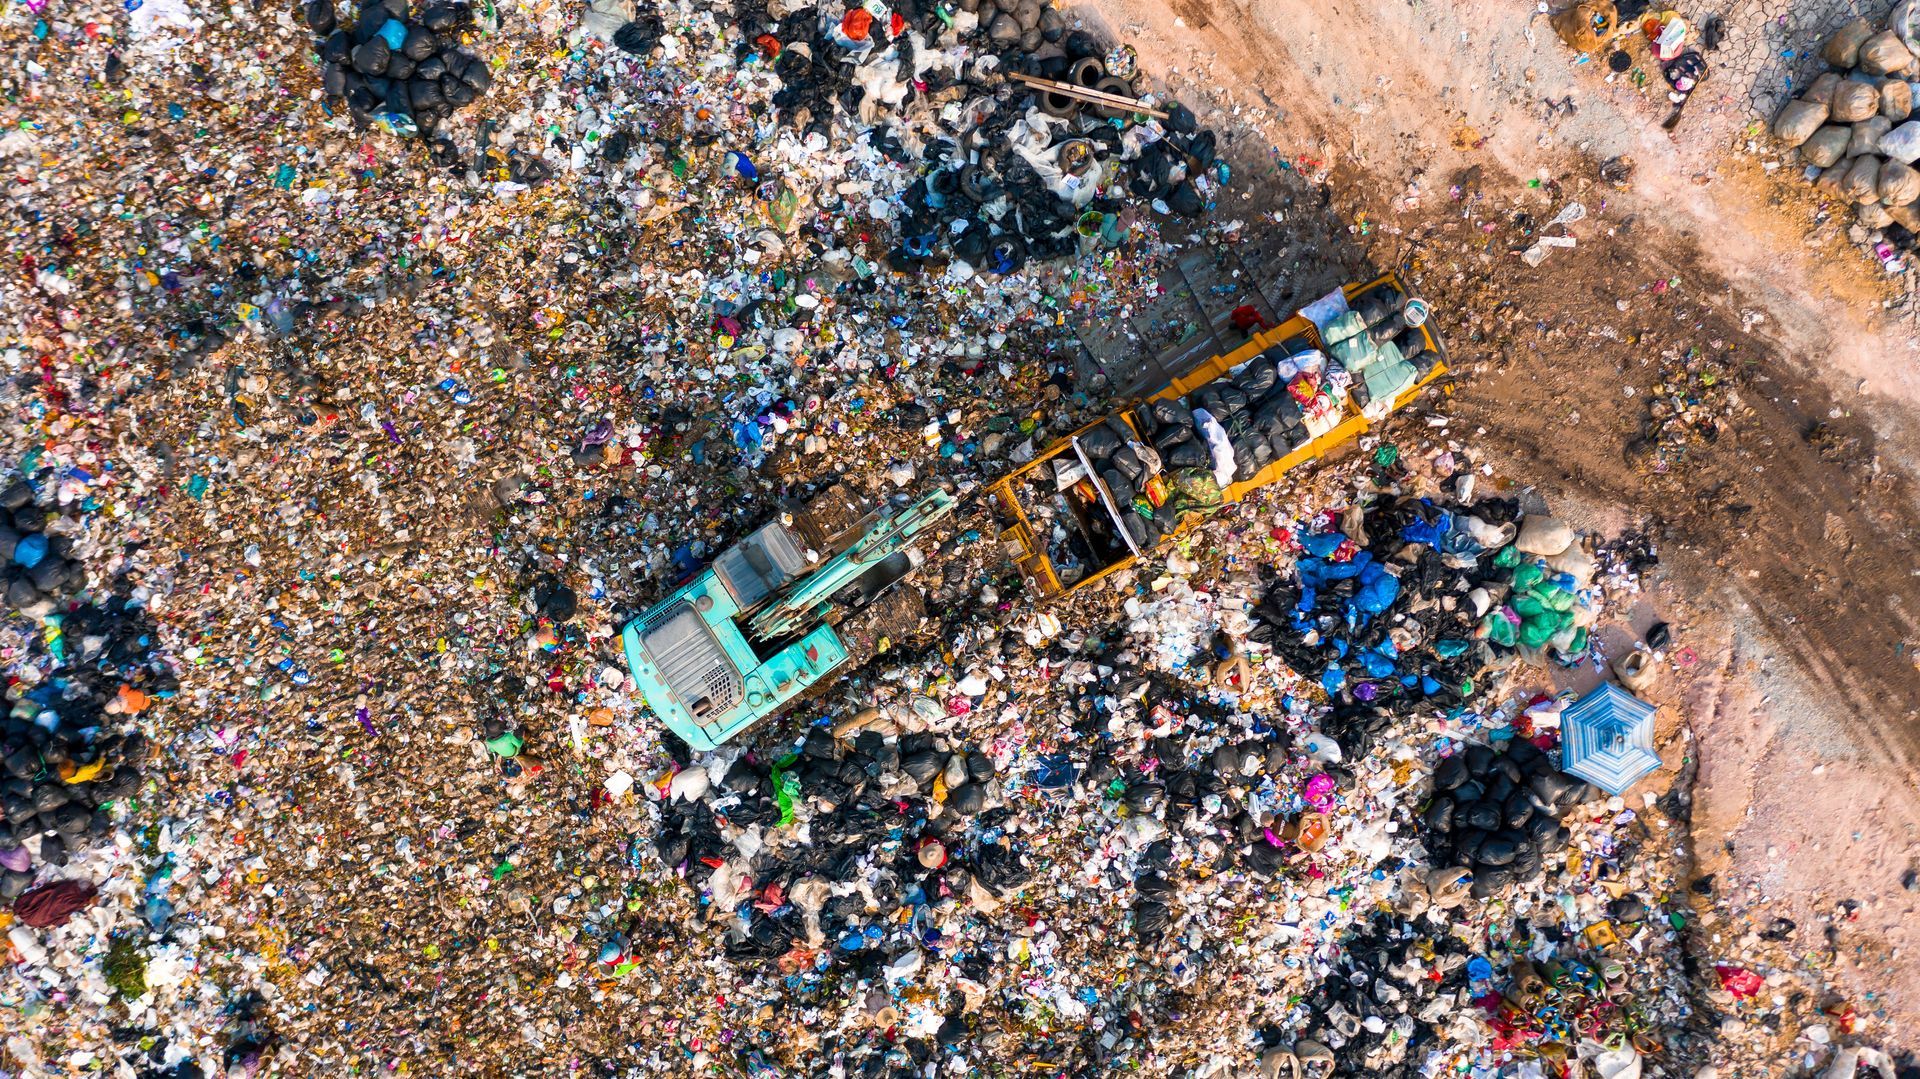 A large machine with a scoop unloads rubbish from a dump truck. Both are dwarfed by the surrounding landfill.